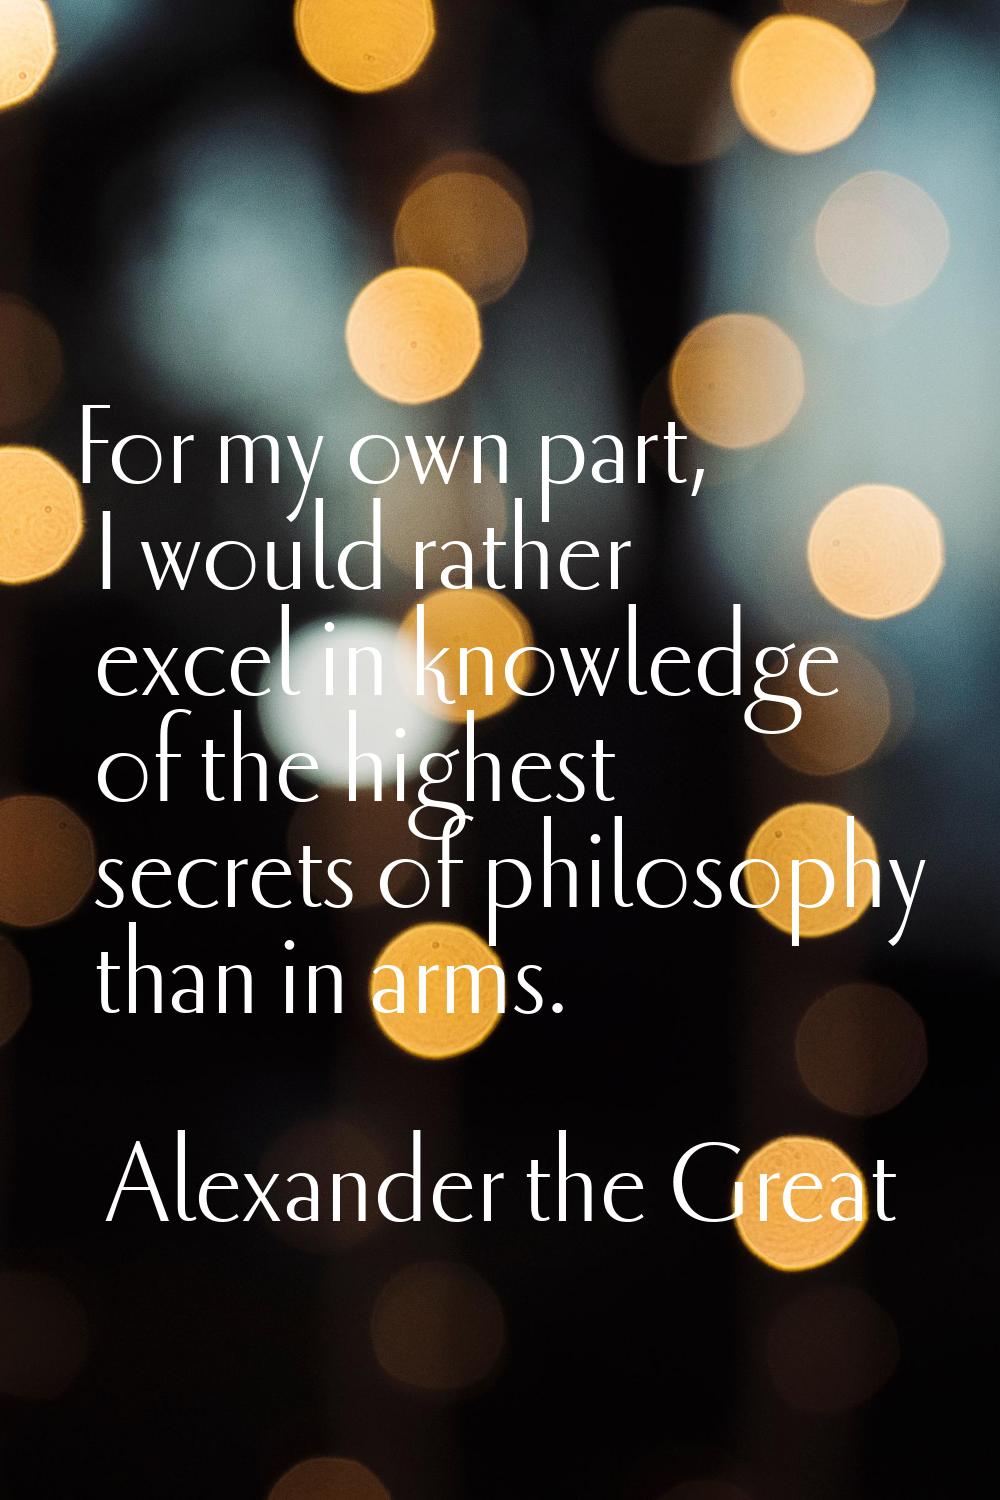 For my own part, I would rather excel in knowledge of the highest secrets of philosophy than in arm